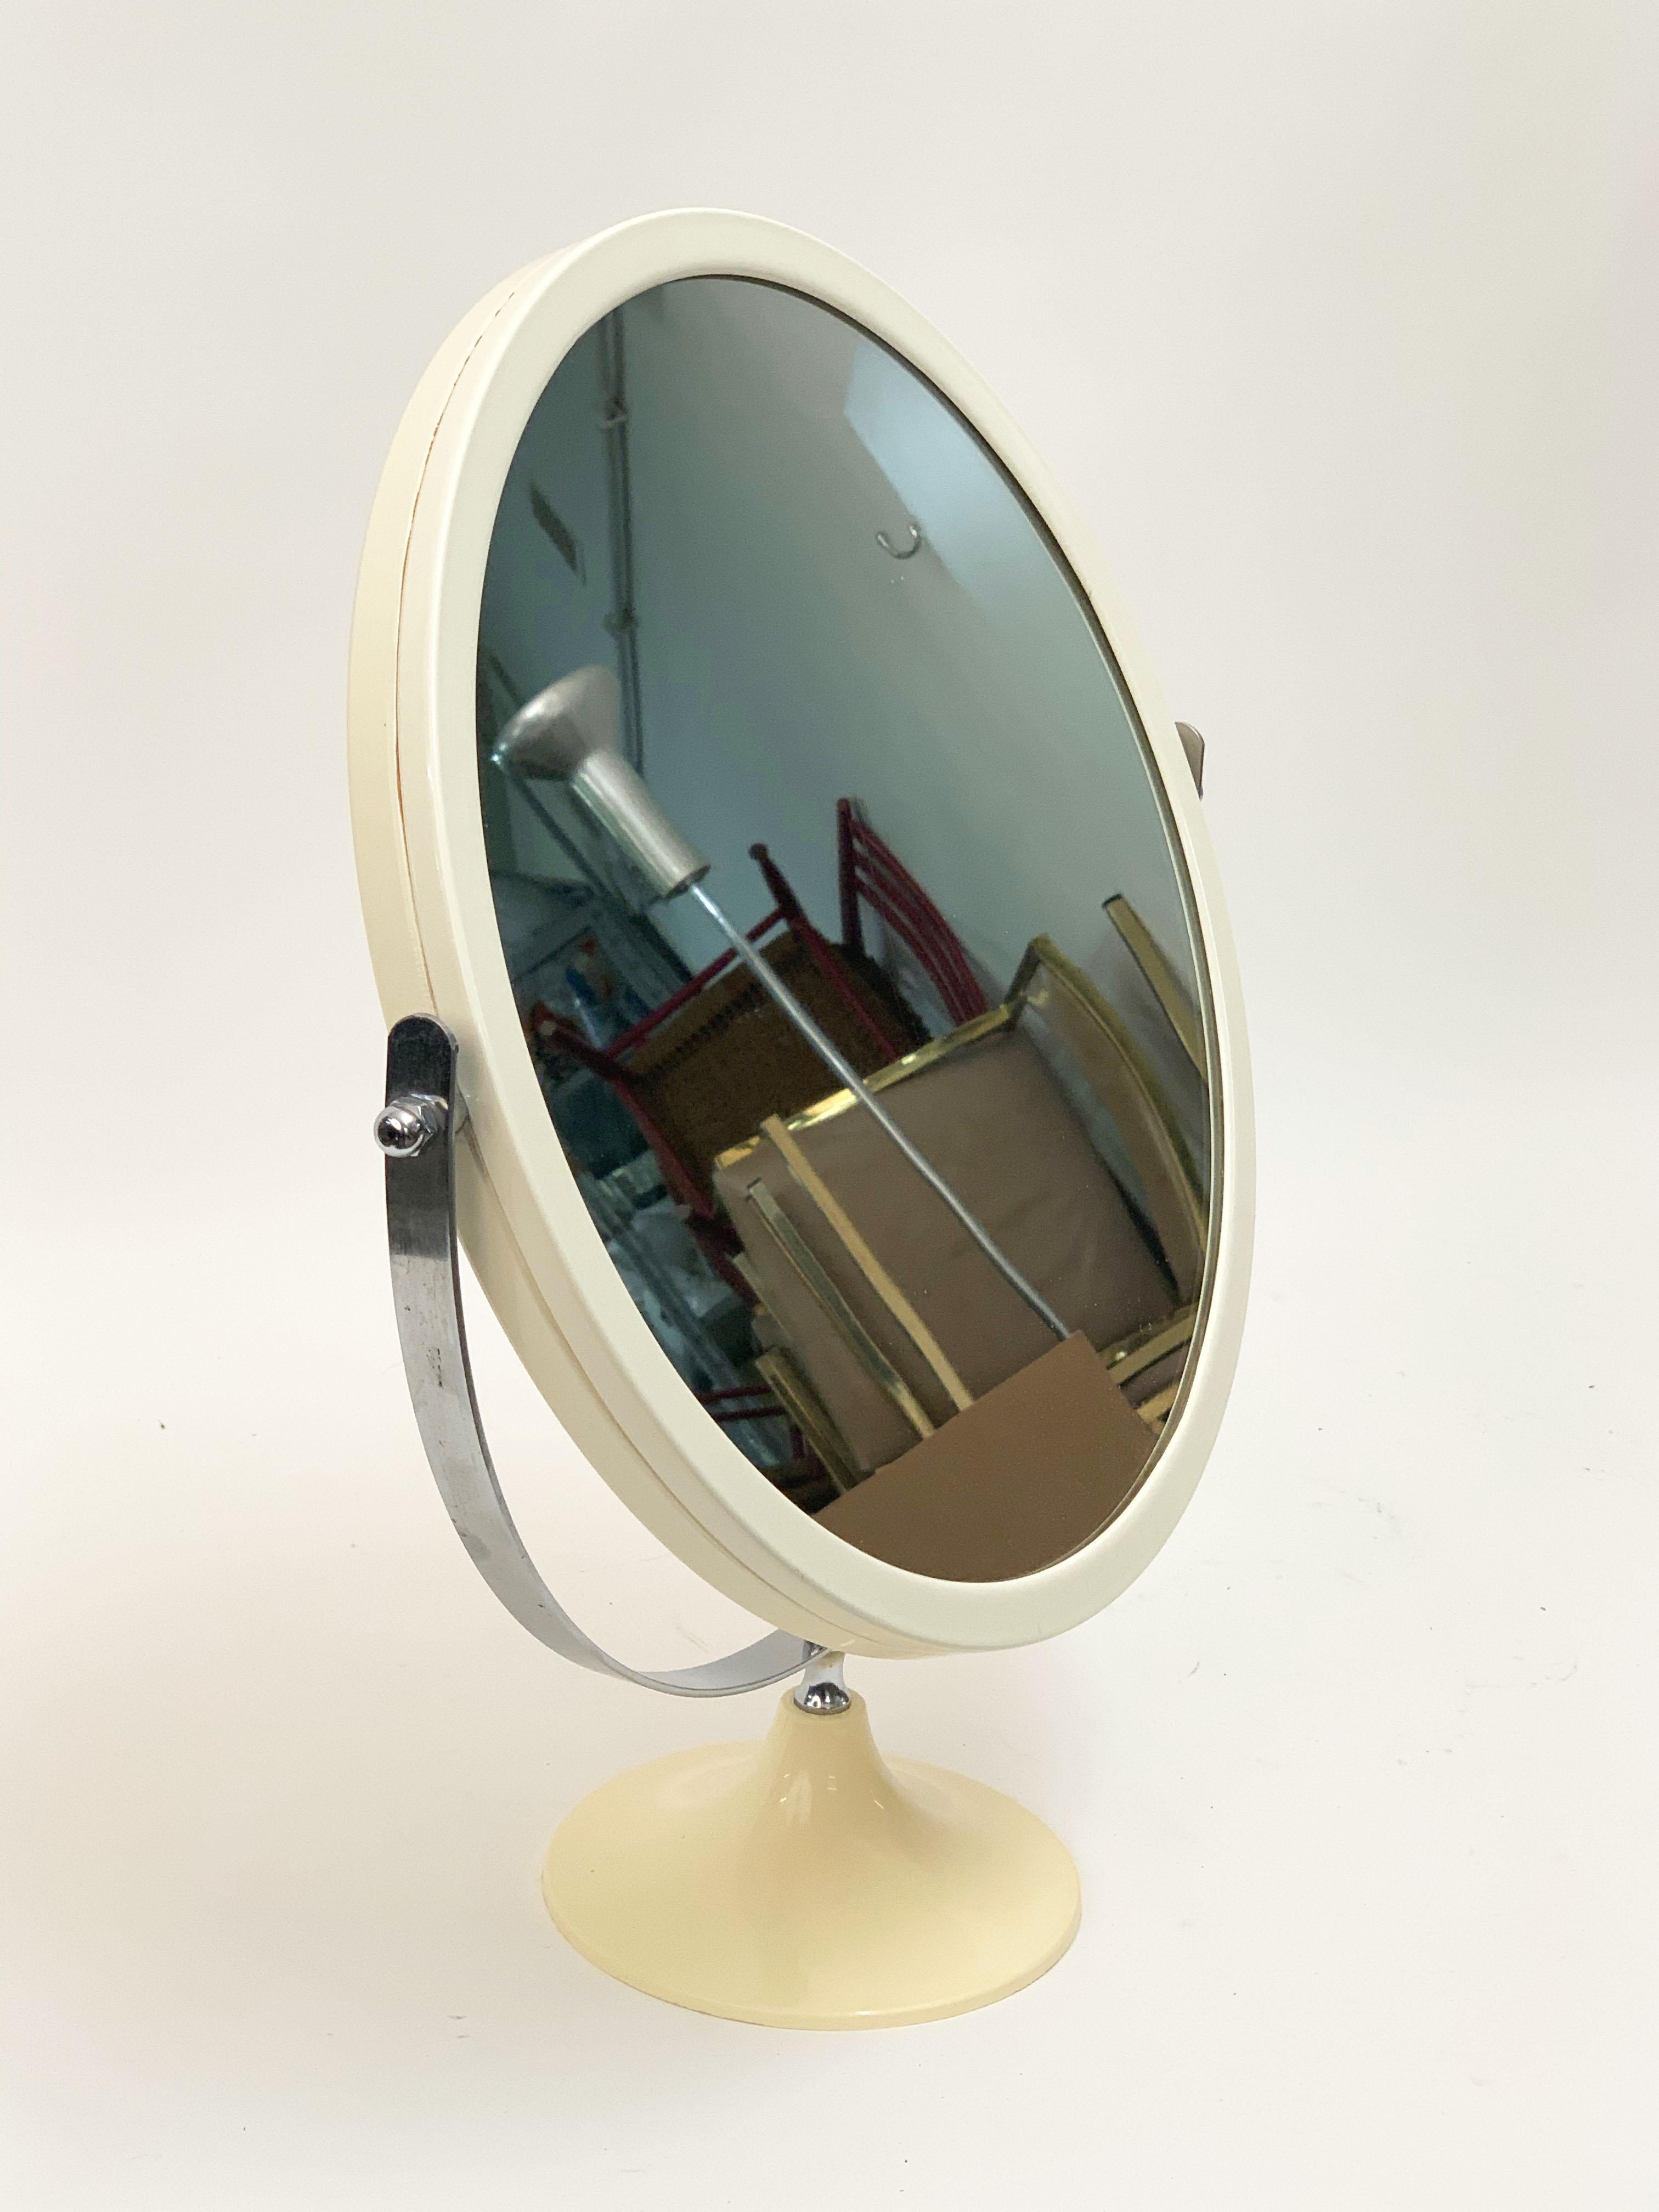 Midcentury Metal and White Plastic Round Italian Table Mirror, Italy, 1980s For Sale 3